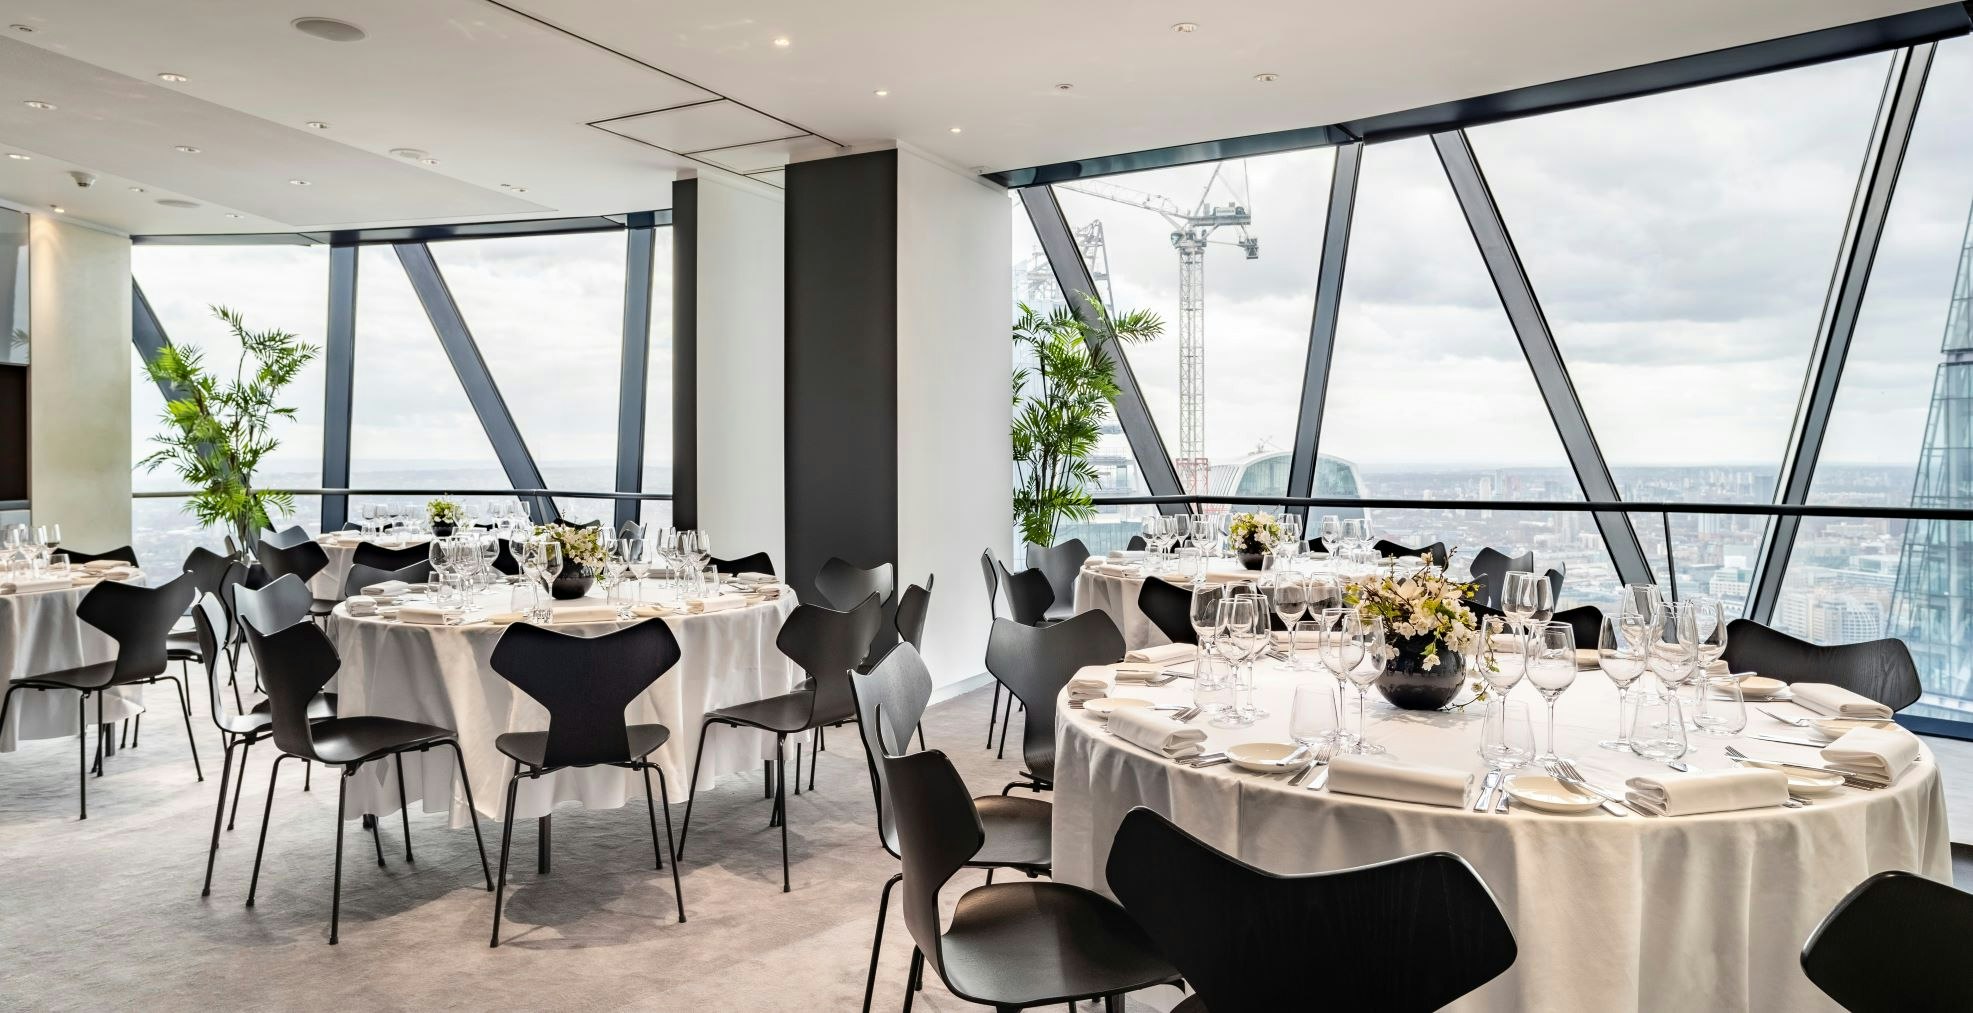 Marriage Proposal Venues in London - Searcys at the Gherkin